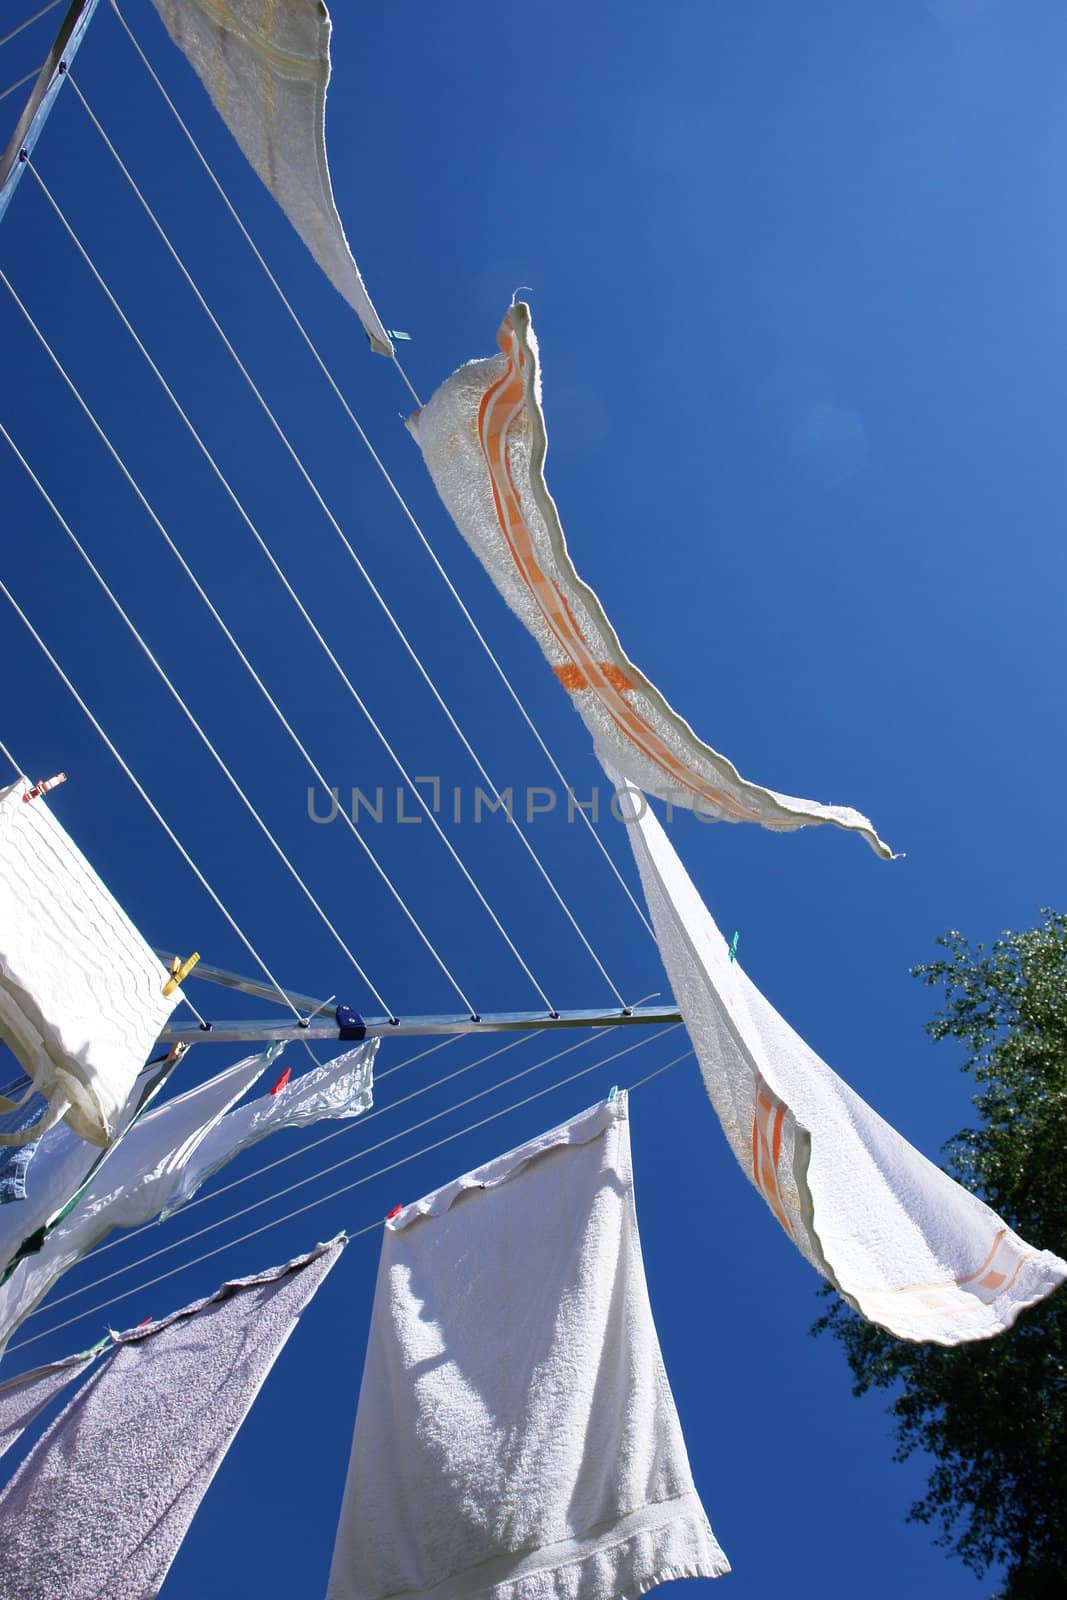 Laundry on a rotary clothes dryer by yucas